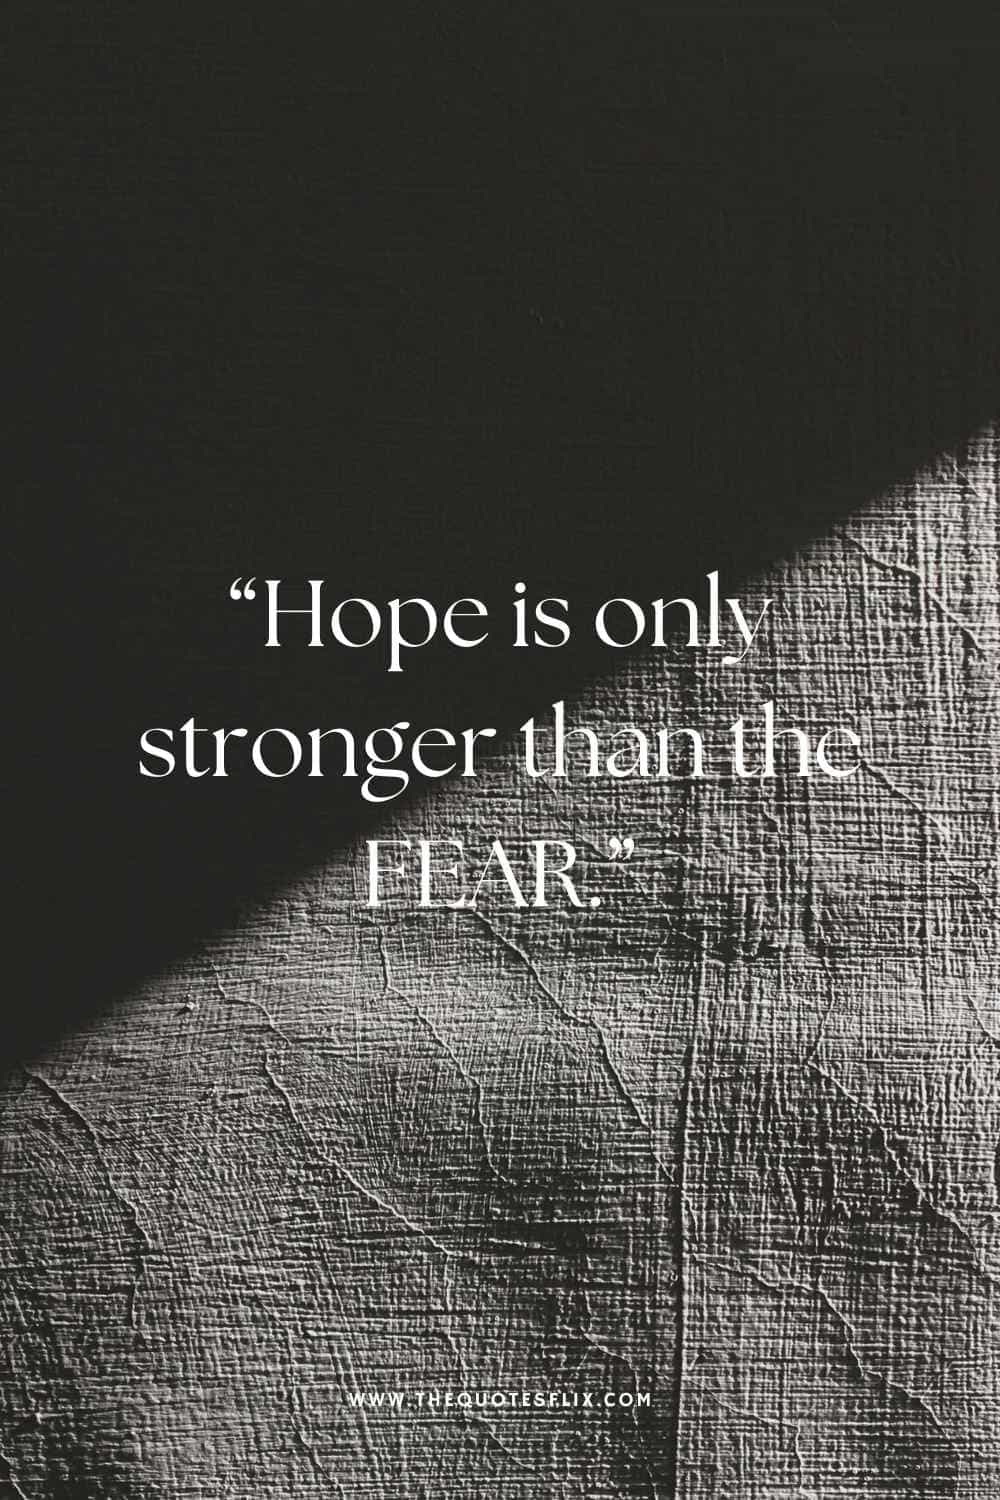 cervical cancer quotes - hope is stronger than the fear